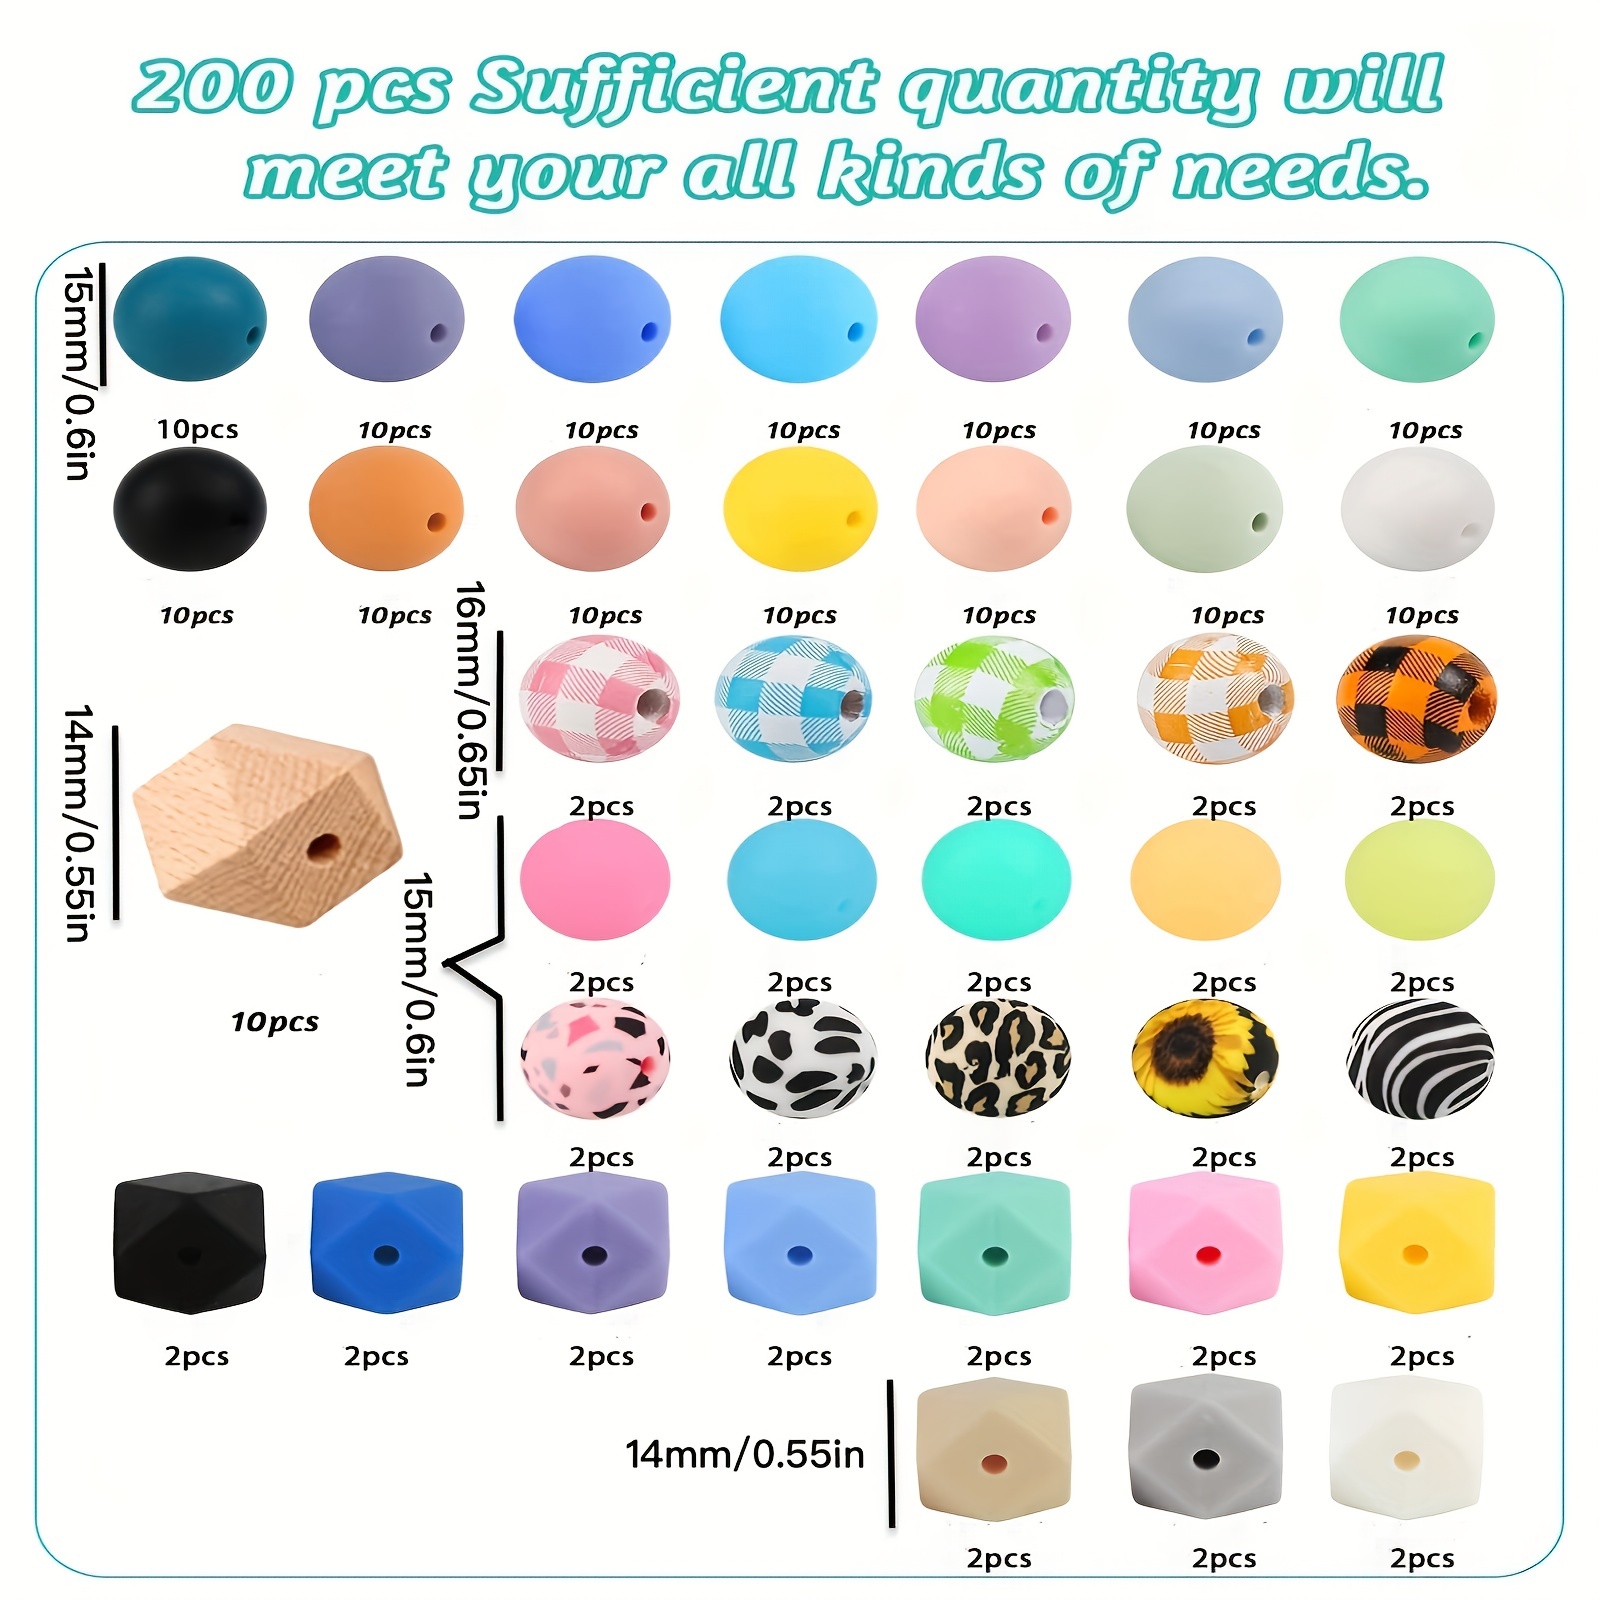 221Pcs Silicone Beads for Keychain Making Kit - 15mm Bulk Silicone Rubber  Key